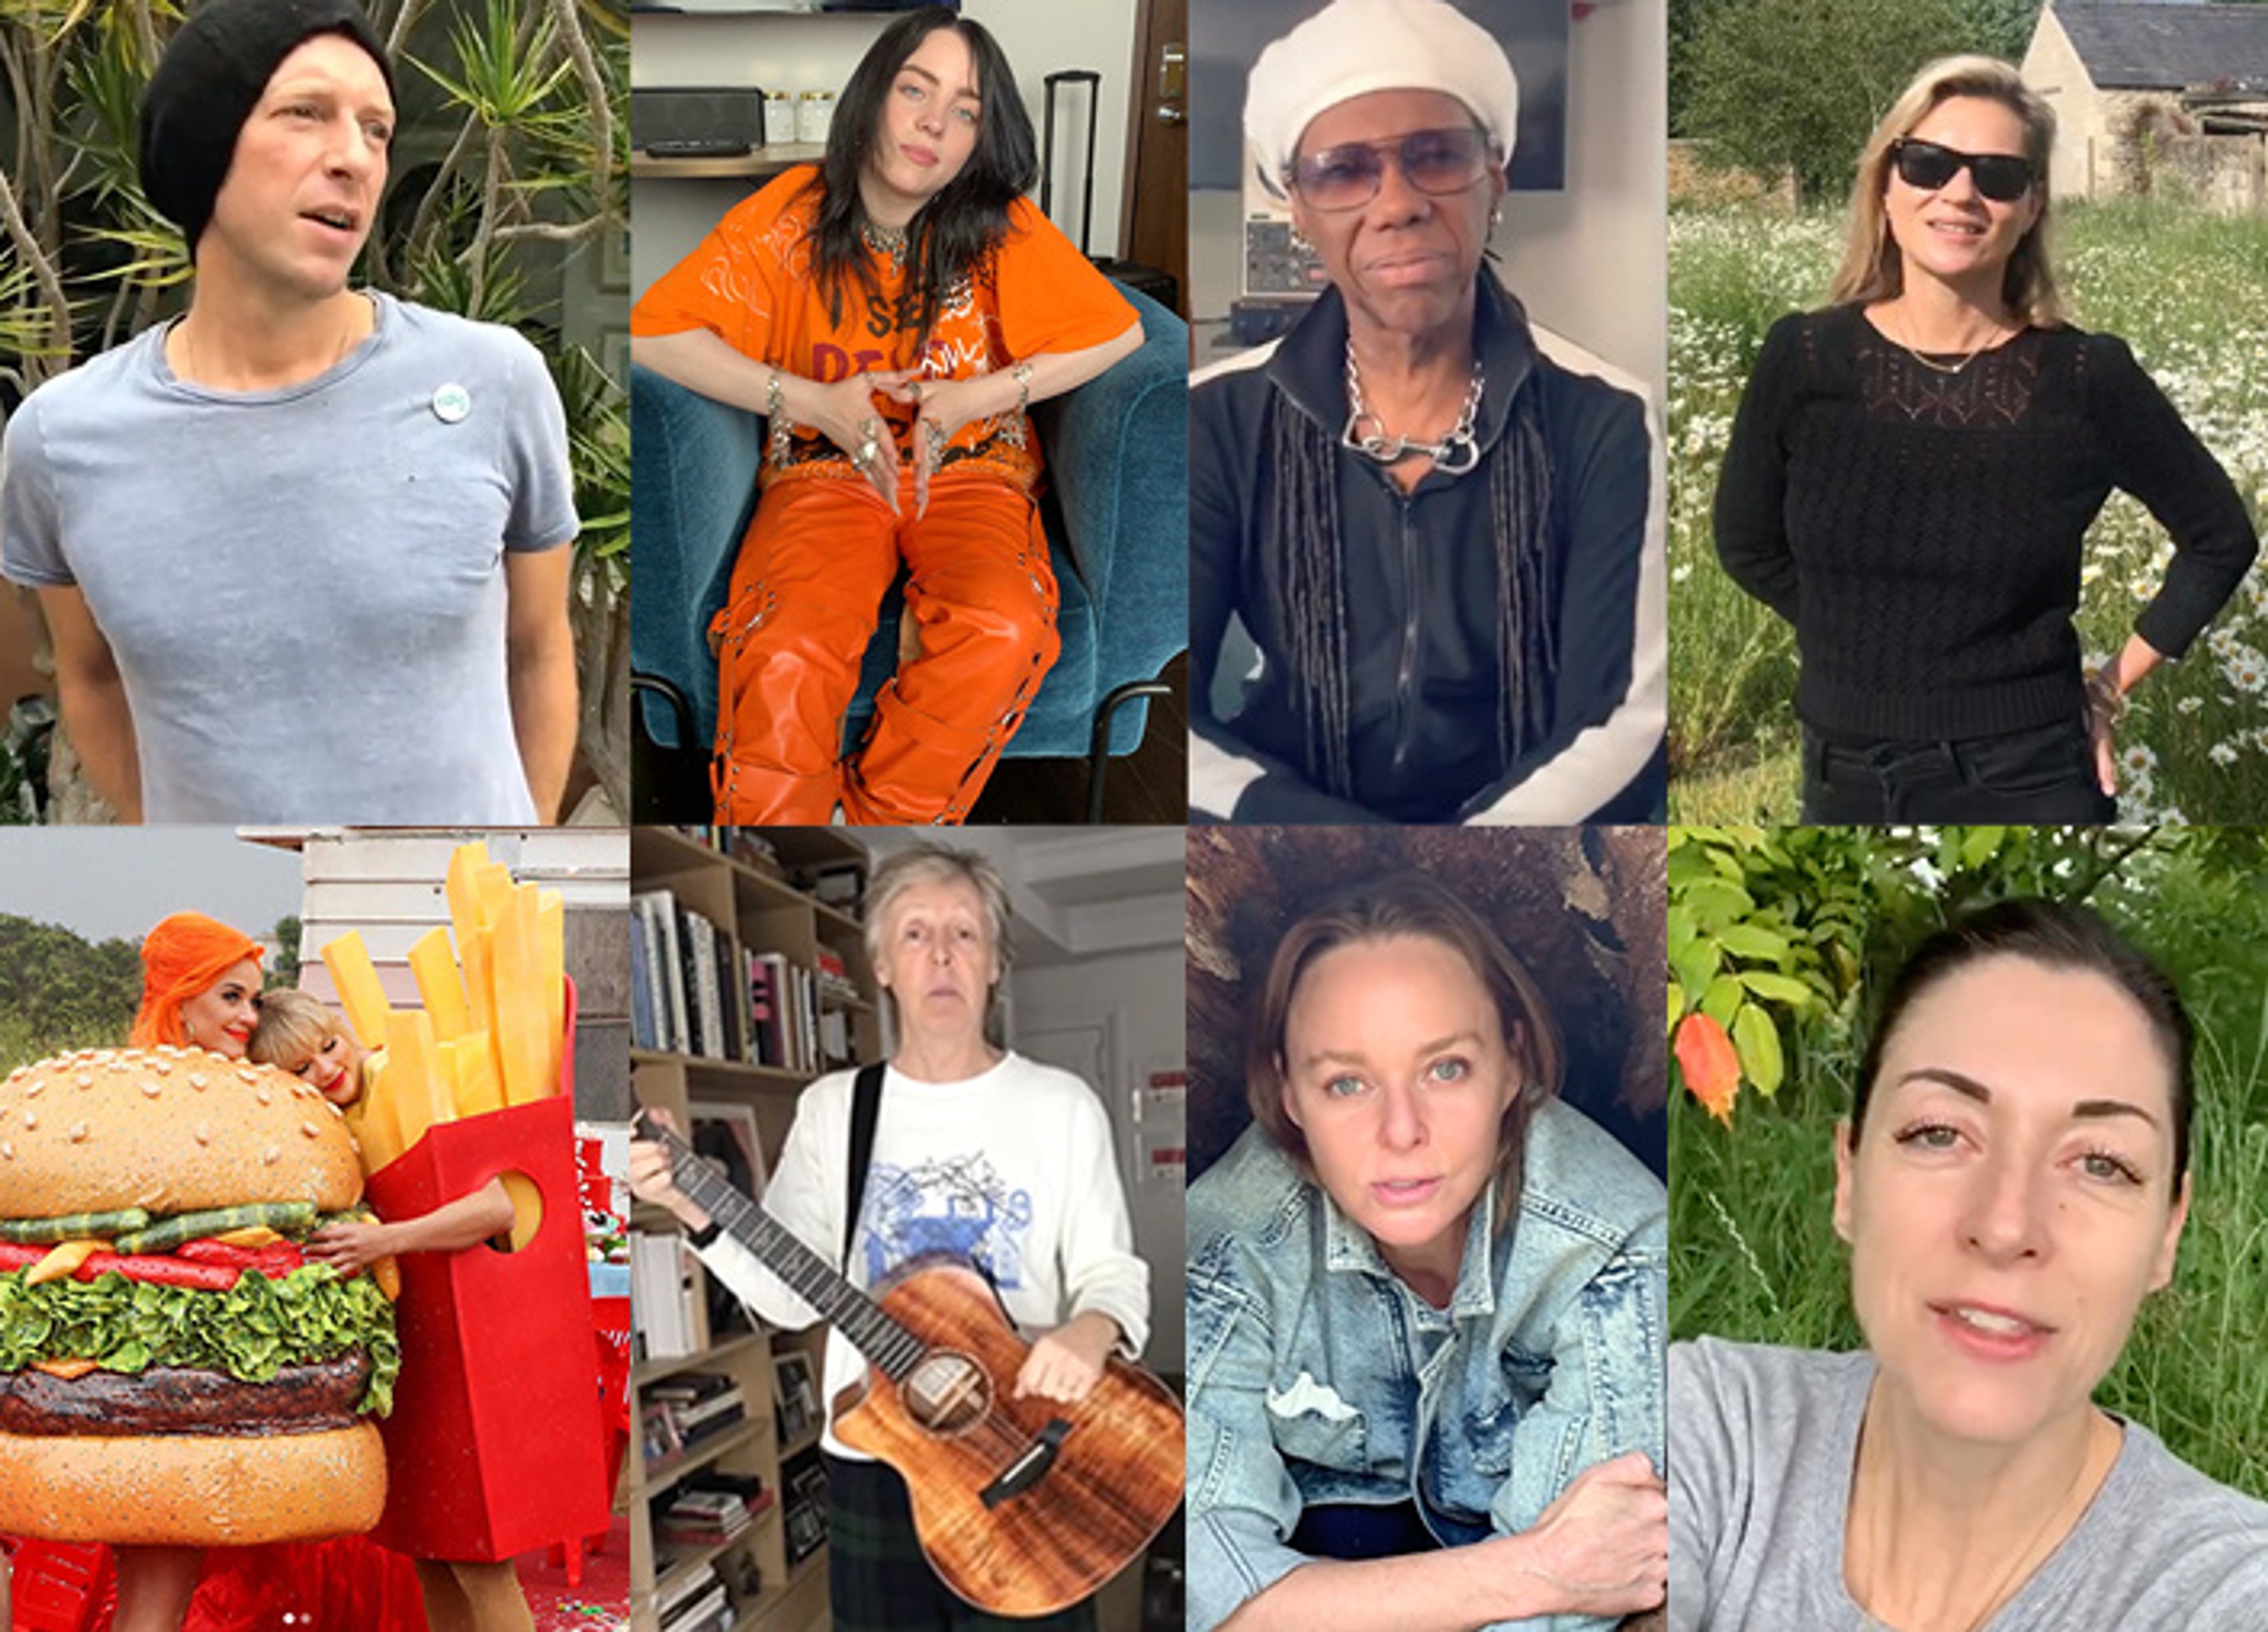 Meat Free Monday celebrated its 10th anniversary with #MFMCountMeIn – bringing celebrities, businesses, not-for-profit groups, educational institutions and individual supporters together, to celebrate what people are doing on the meat free front and inspire even more people to get on board.